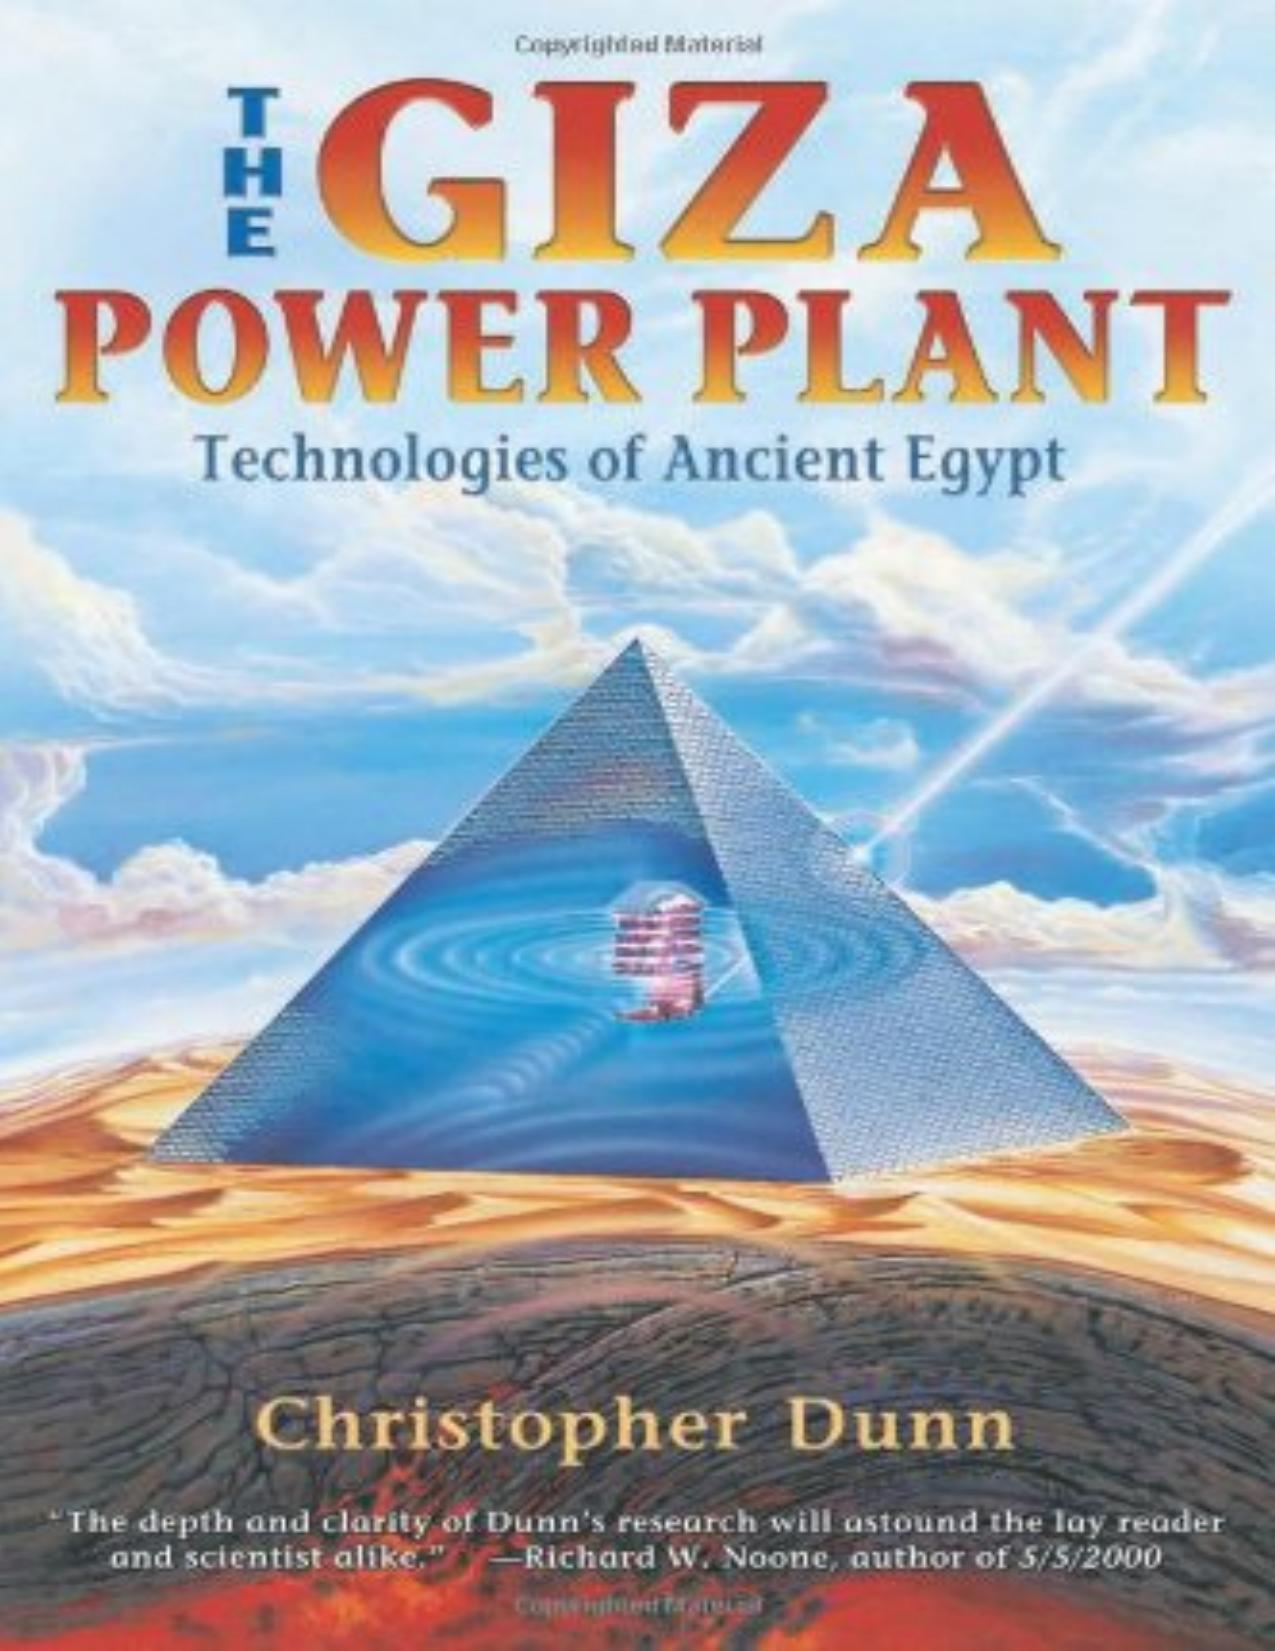 The Giza Power Plant by Christopher Dunn